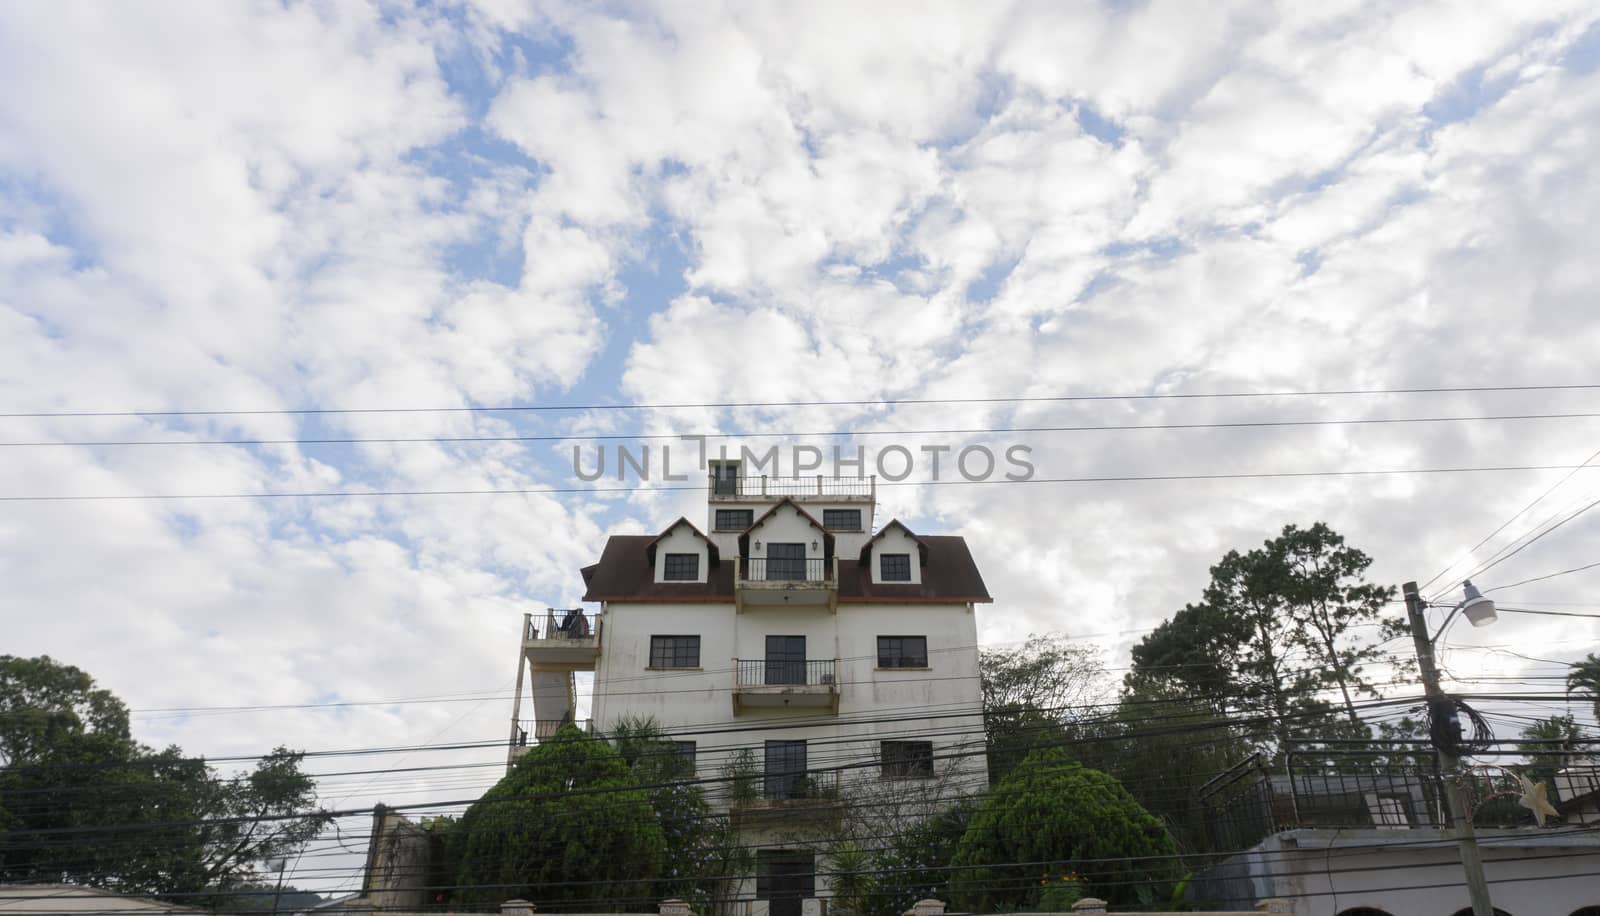 Beautiful house with a lot of clouds and blue sky